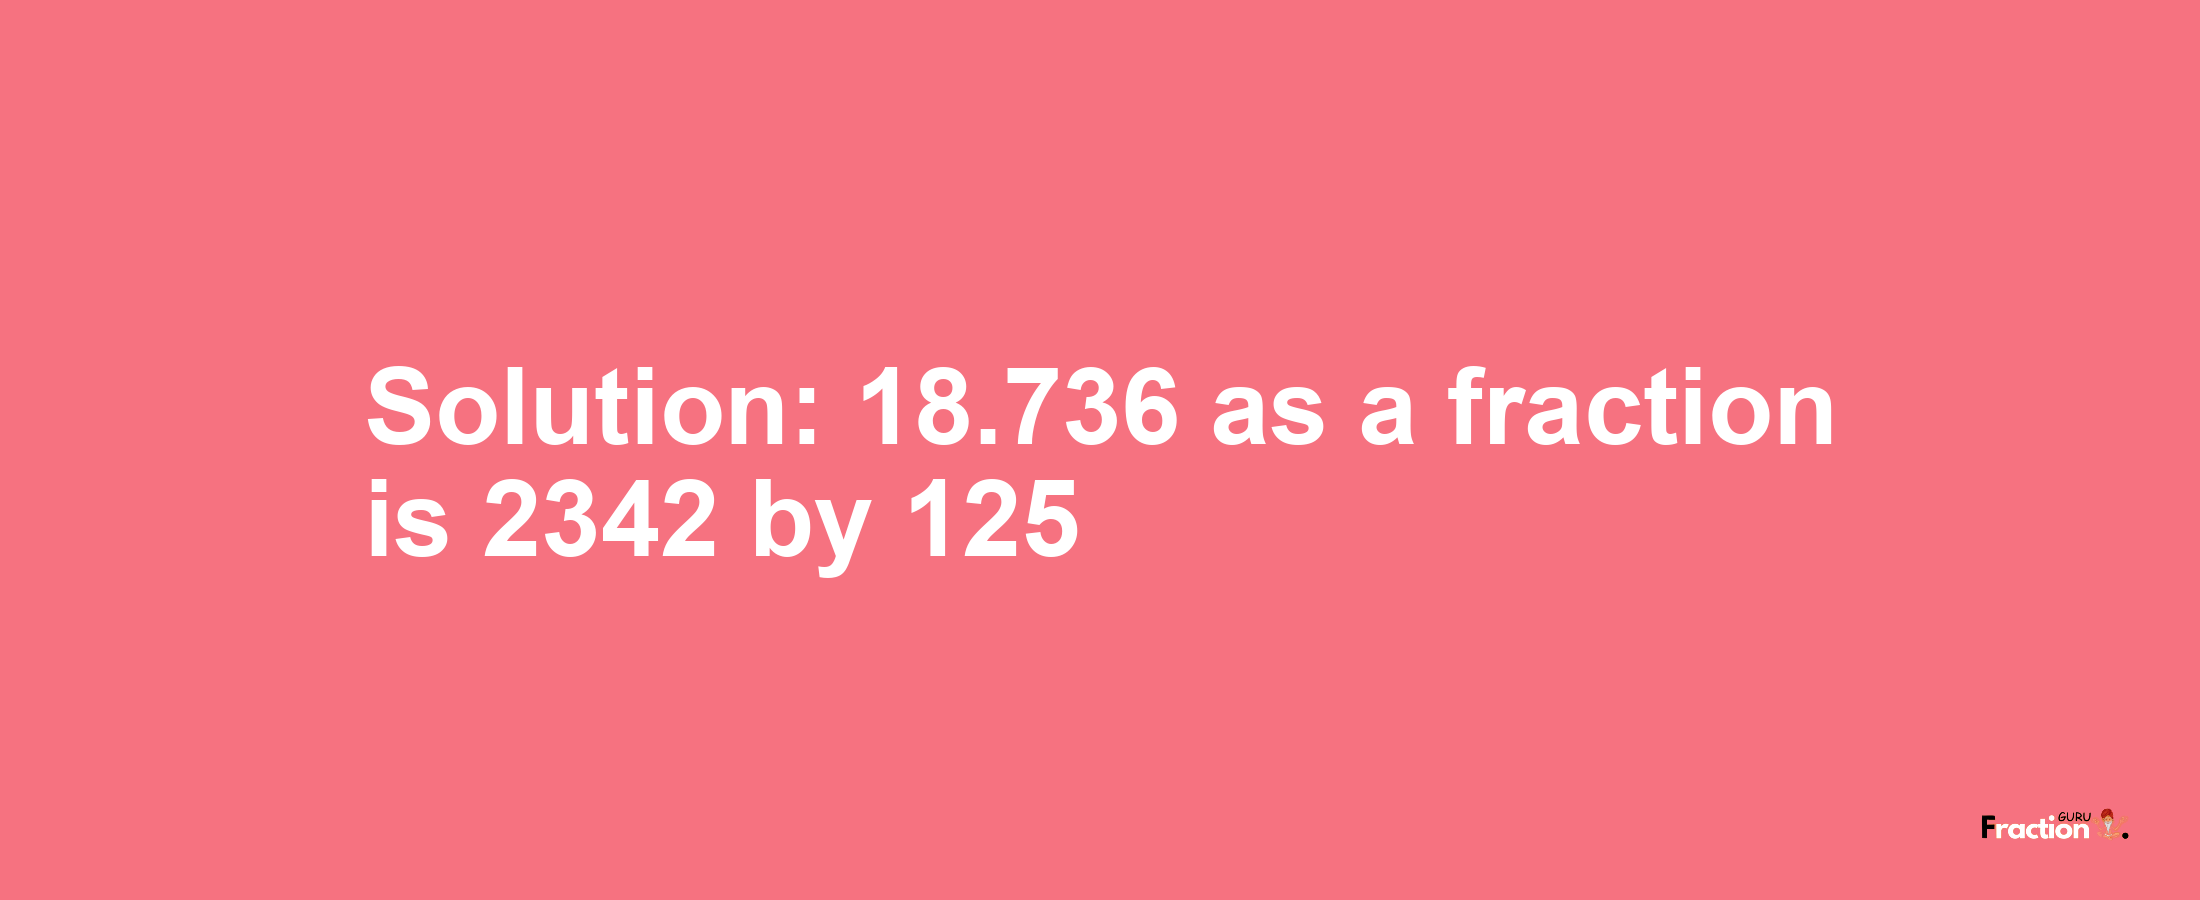 Solution:18.736 as a fraction is 2342/125